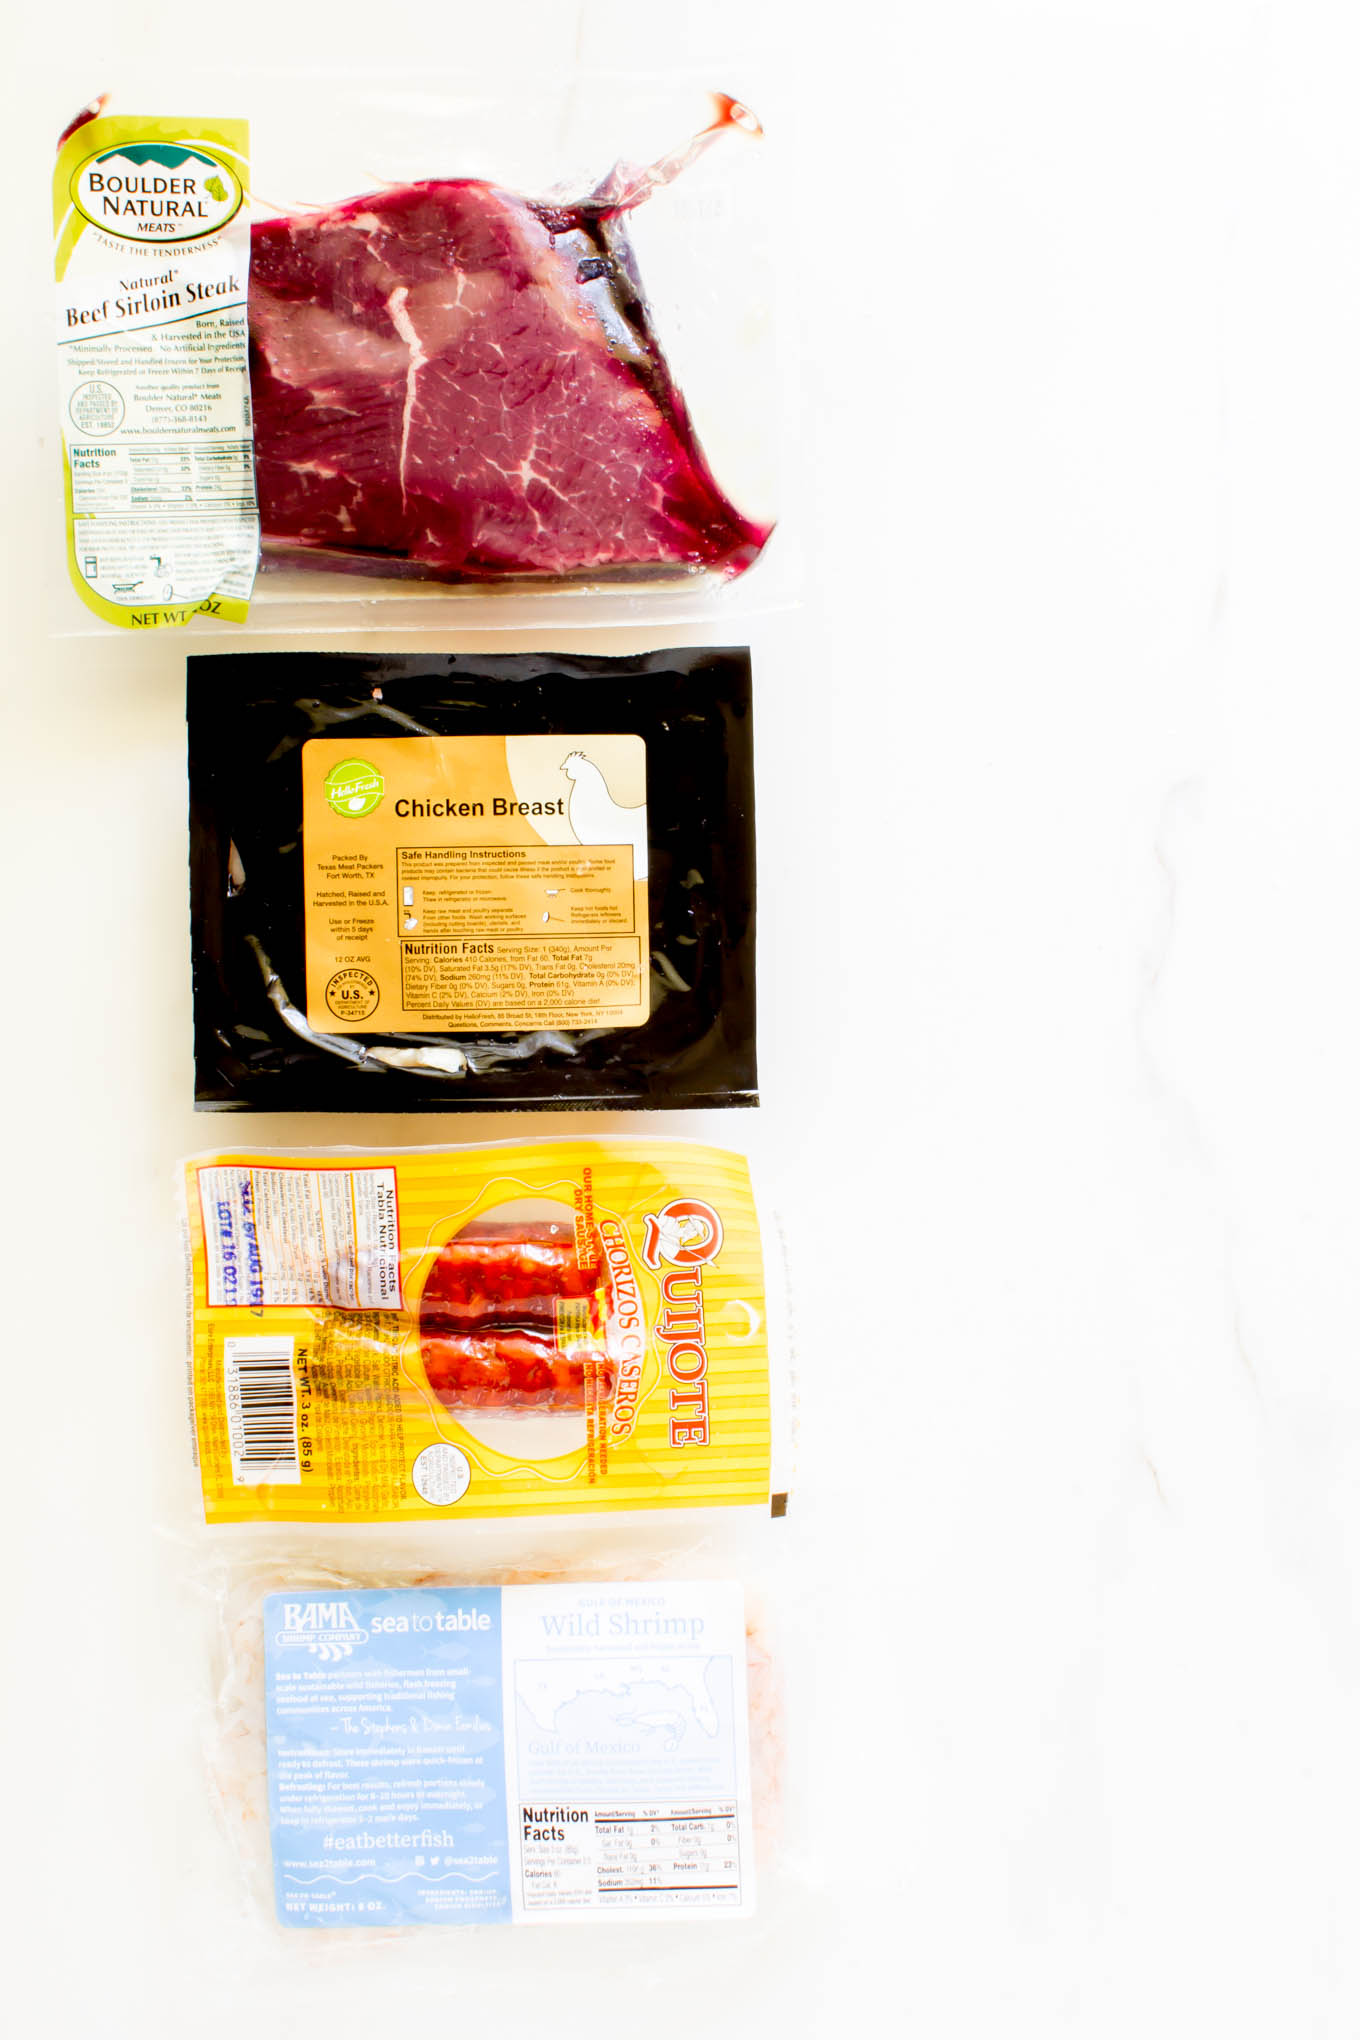 Switching up meals with HelloFresh! | immaEATthat.com #sponsored